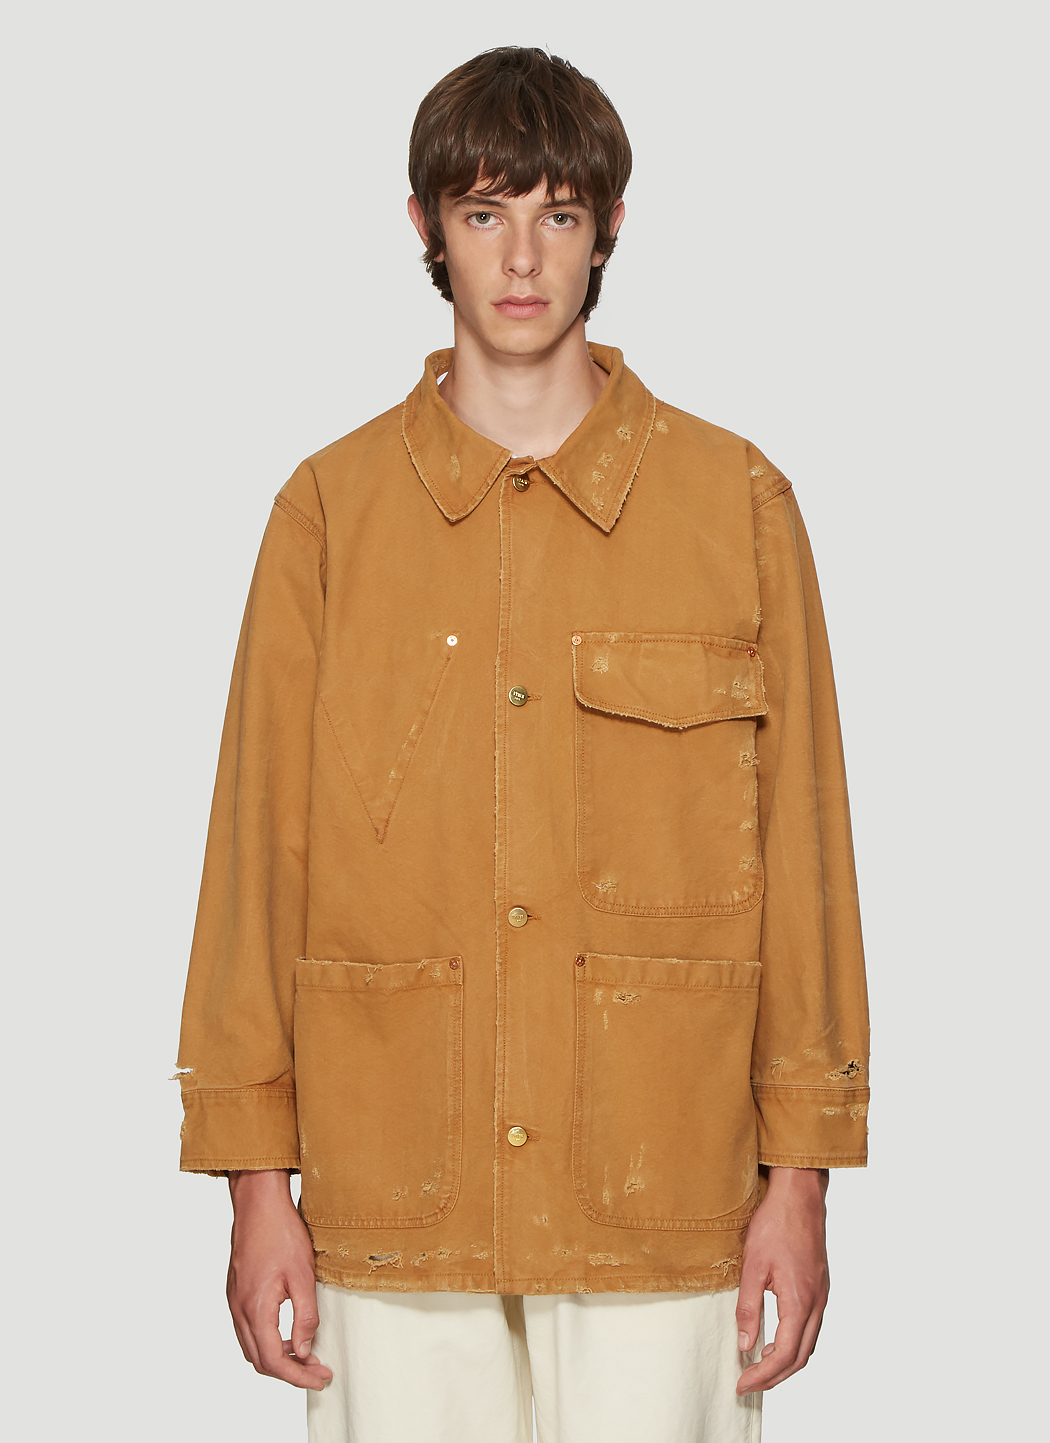 Vyner Articles Distressed Worker Jacket | LN-CC